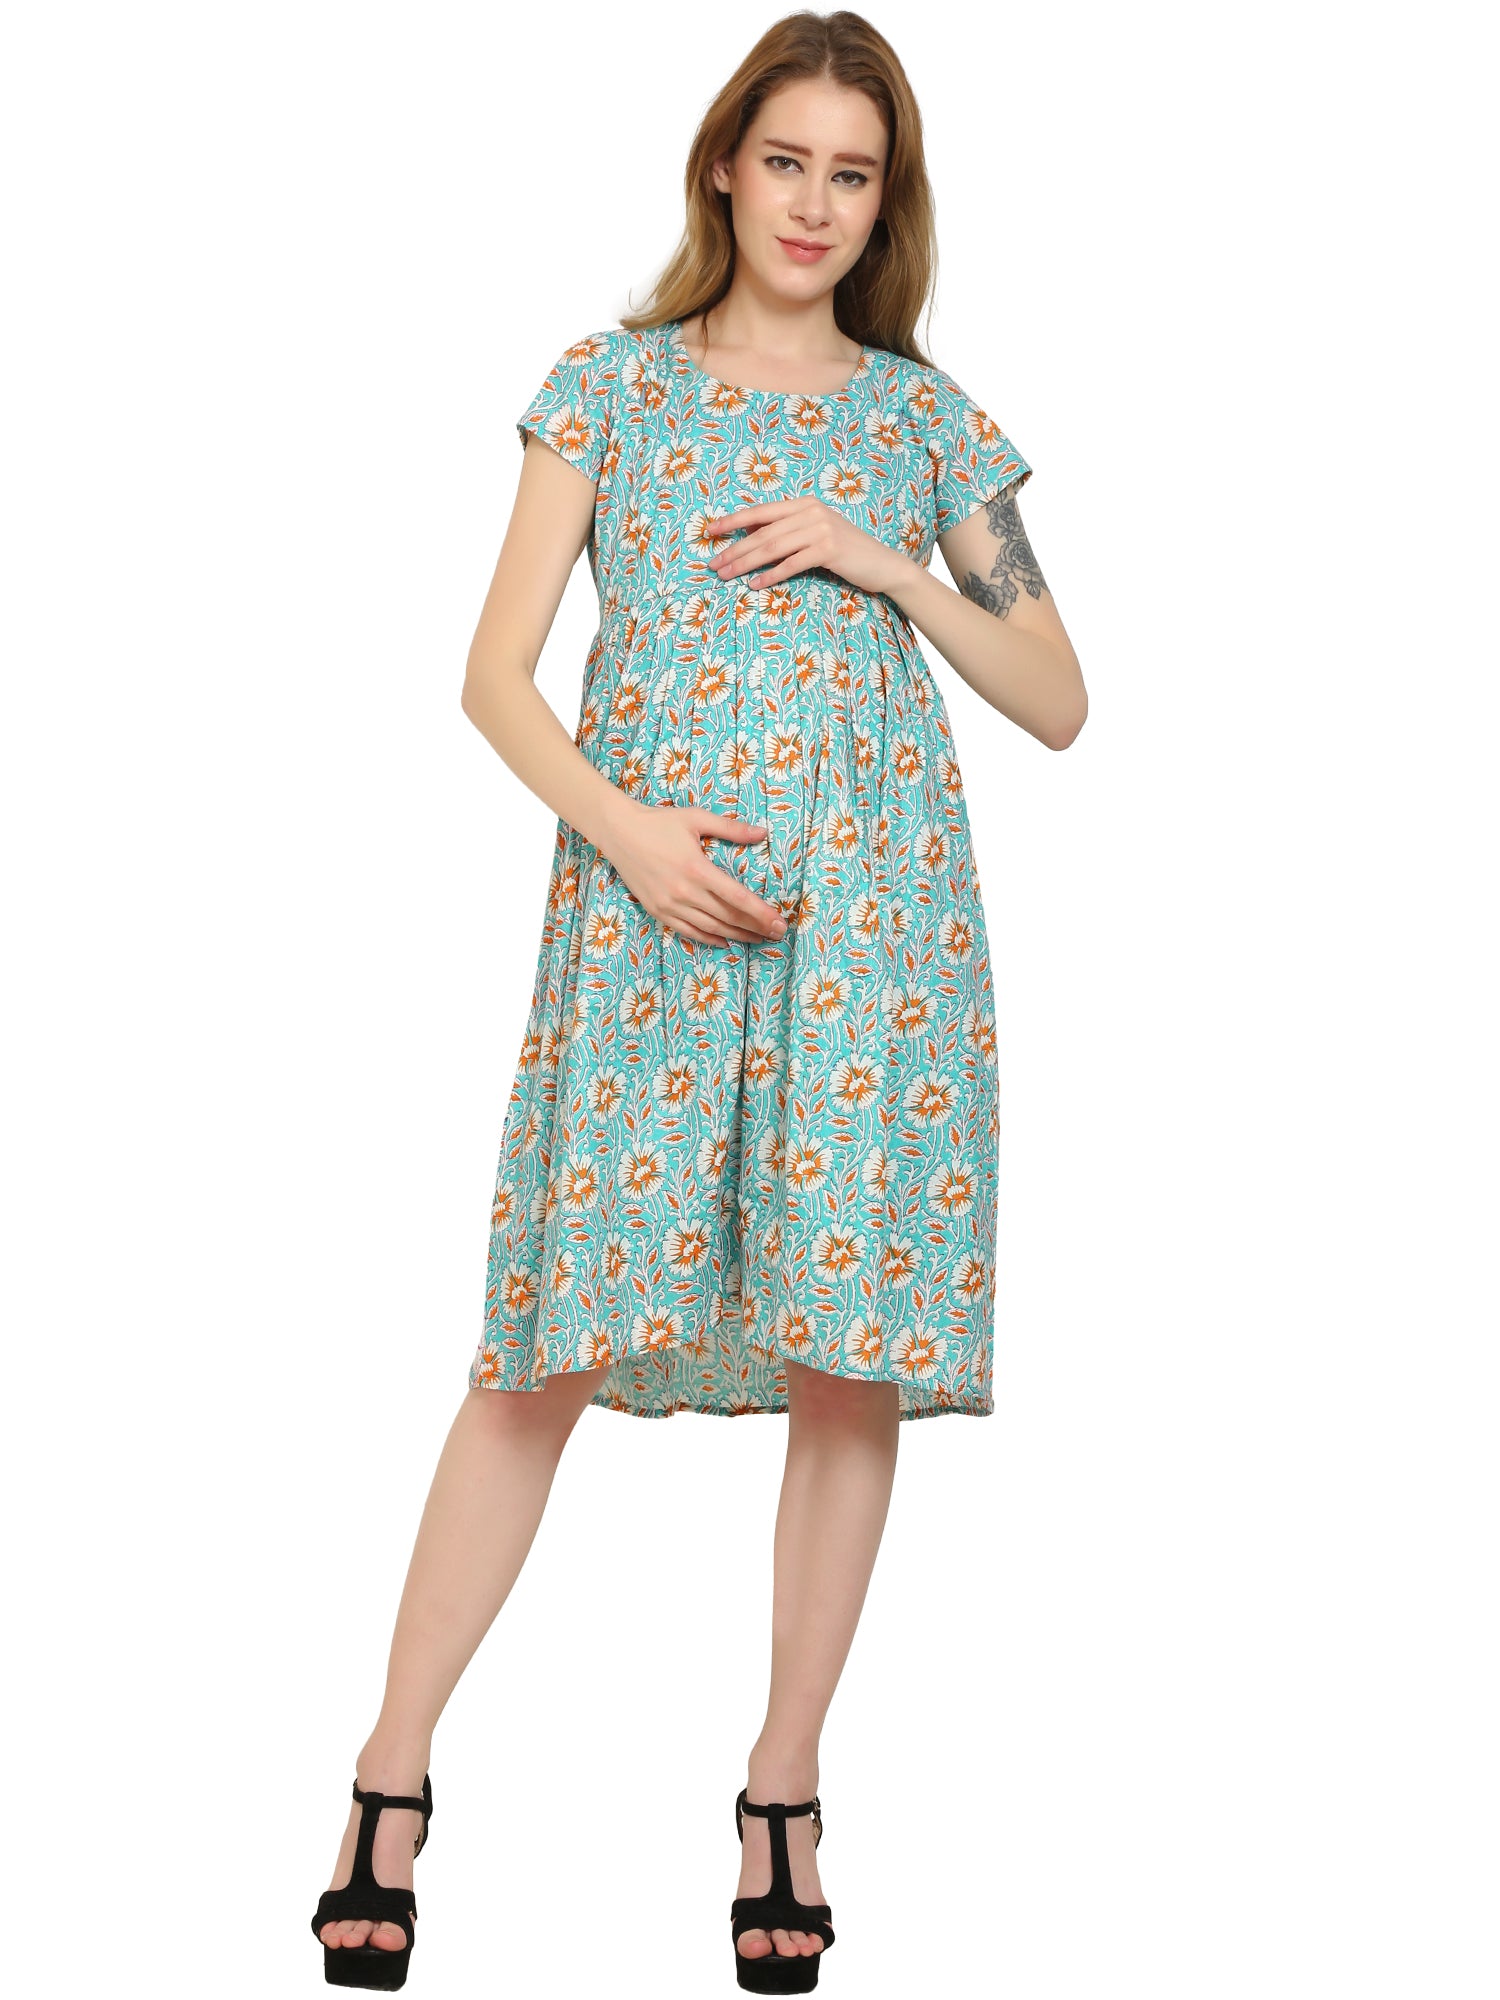 Teal Fit and Flare Cotton Maternity and Feeding Dress